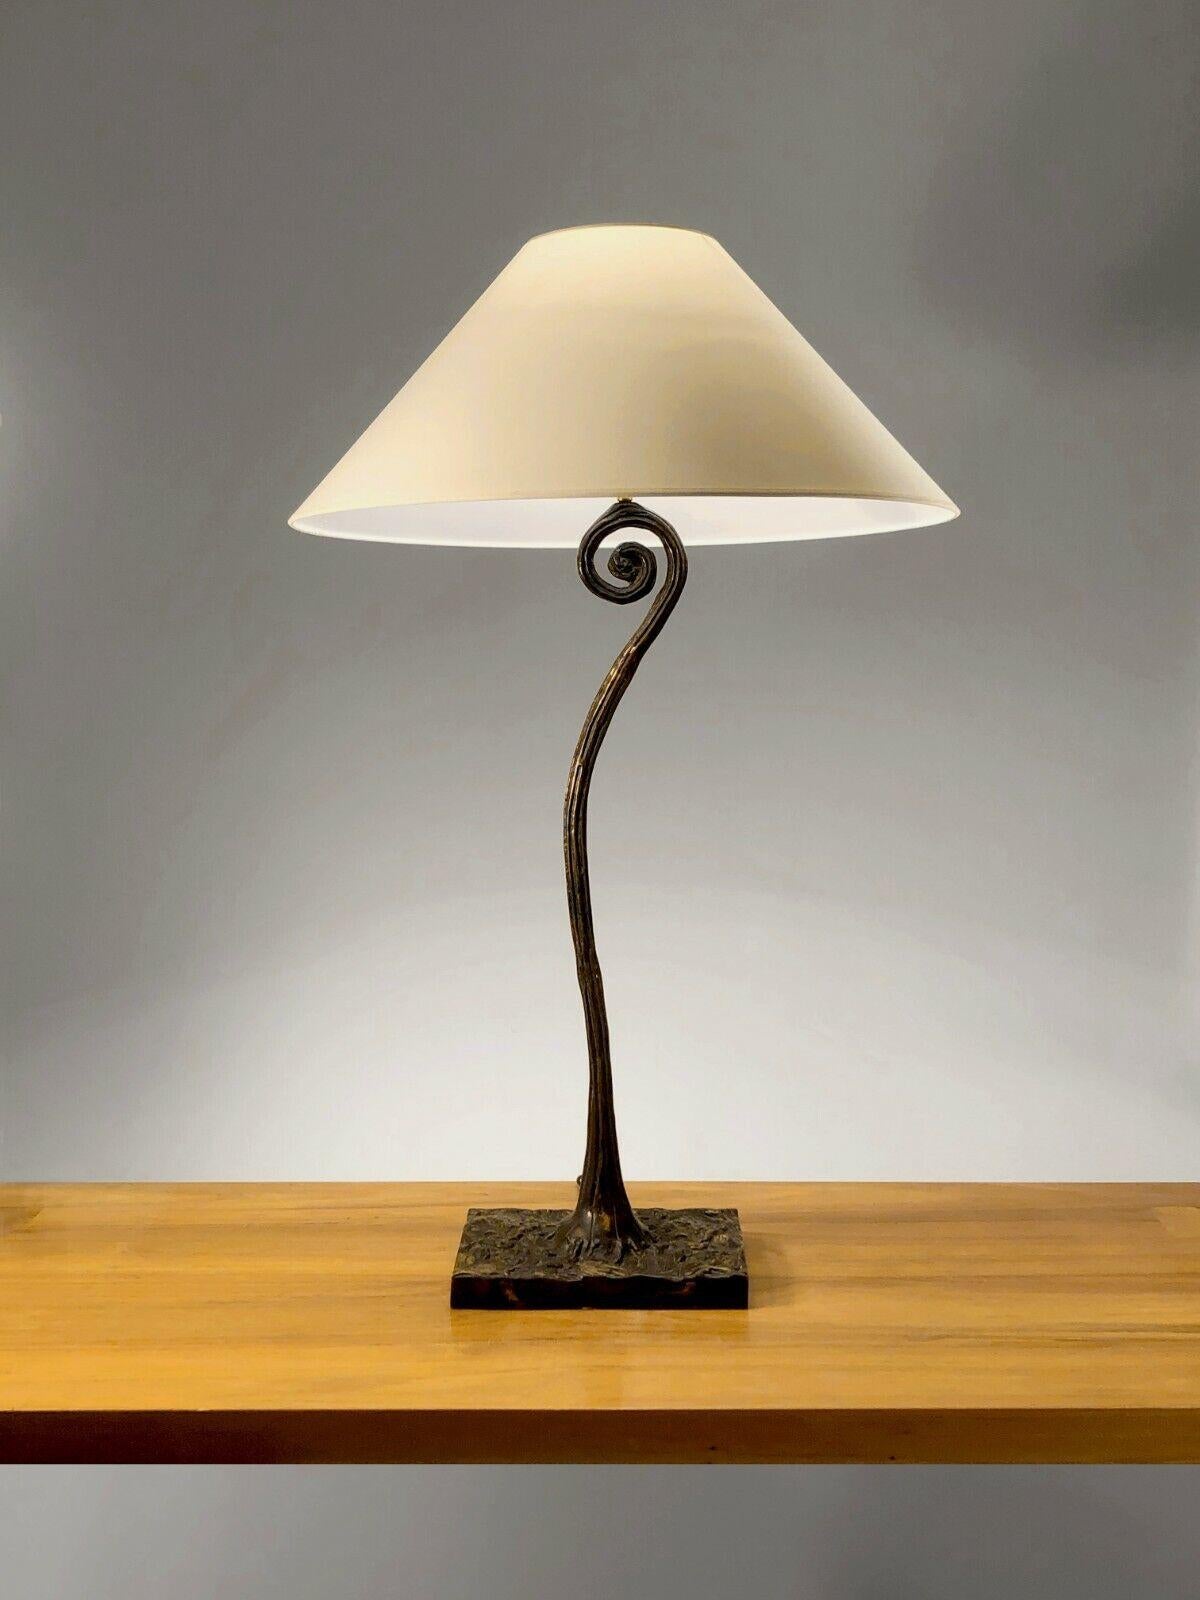 An elegant and sculptural very large table lamp (or small floor lamp) of organic, plant inspiration, Post-Modernist, Neo-Baroque, rectangular base and vertical axis with sculpted bronze body with gunmetal patina, in the spirit of Philippe Anthonioz,